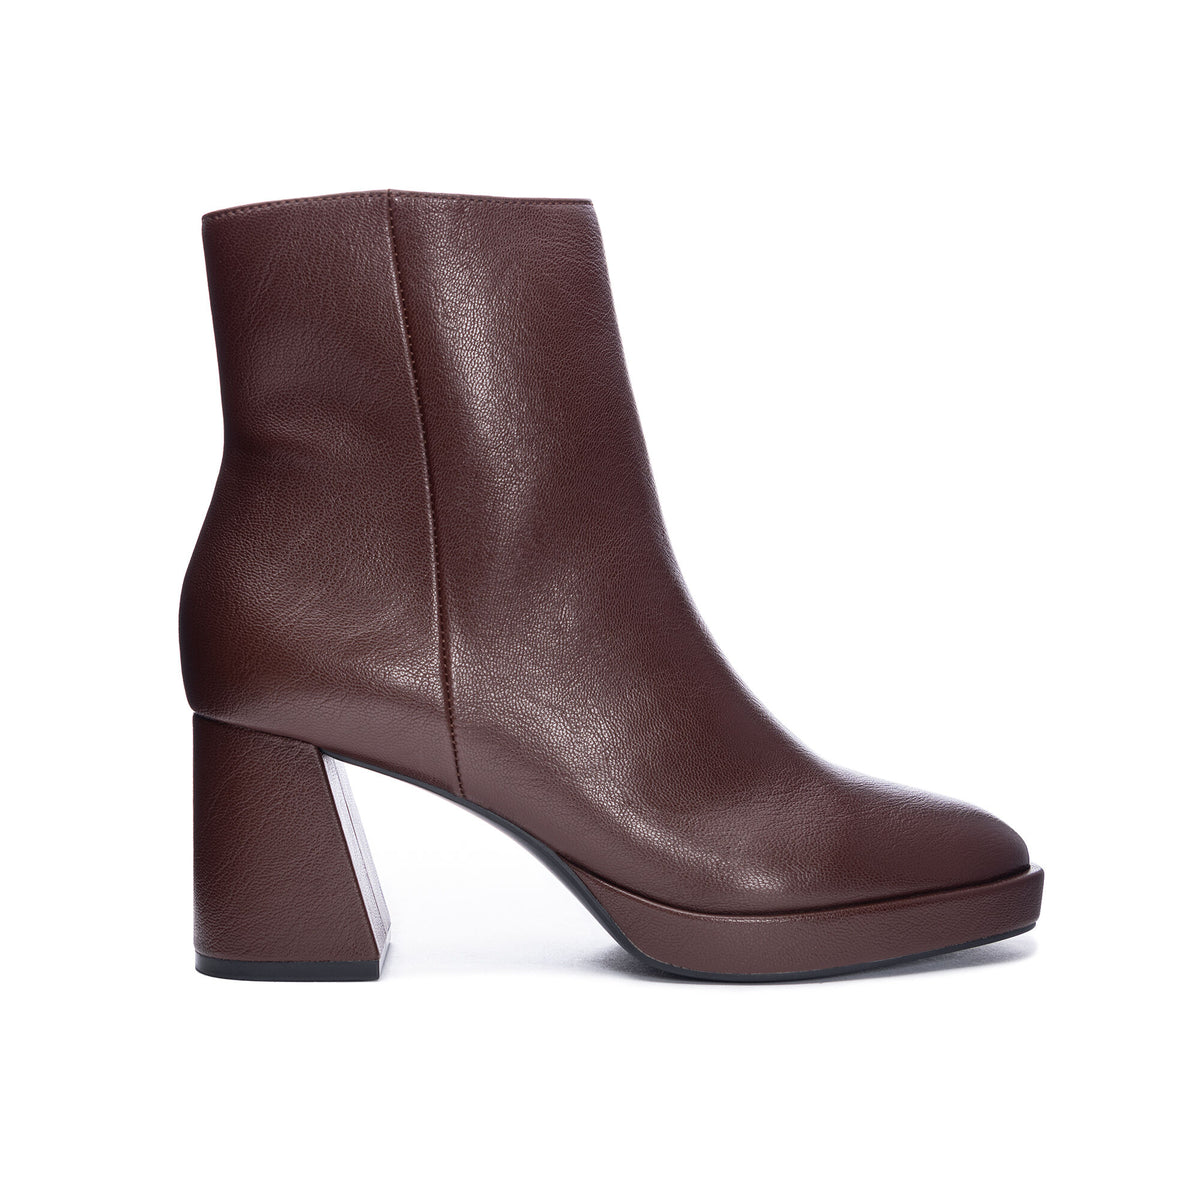 Chinese Laundry Dodger Ankle Leather Boots - Chocolate